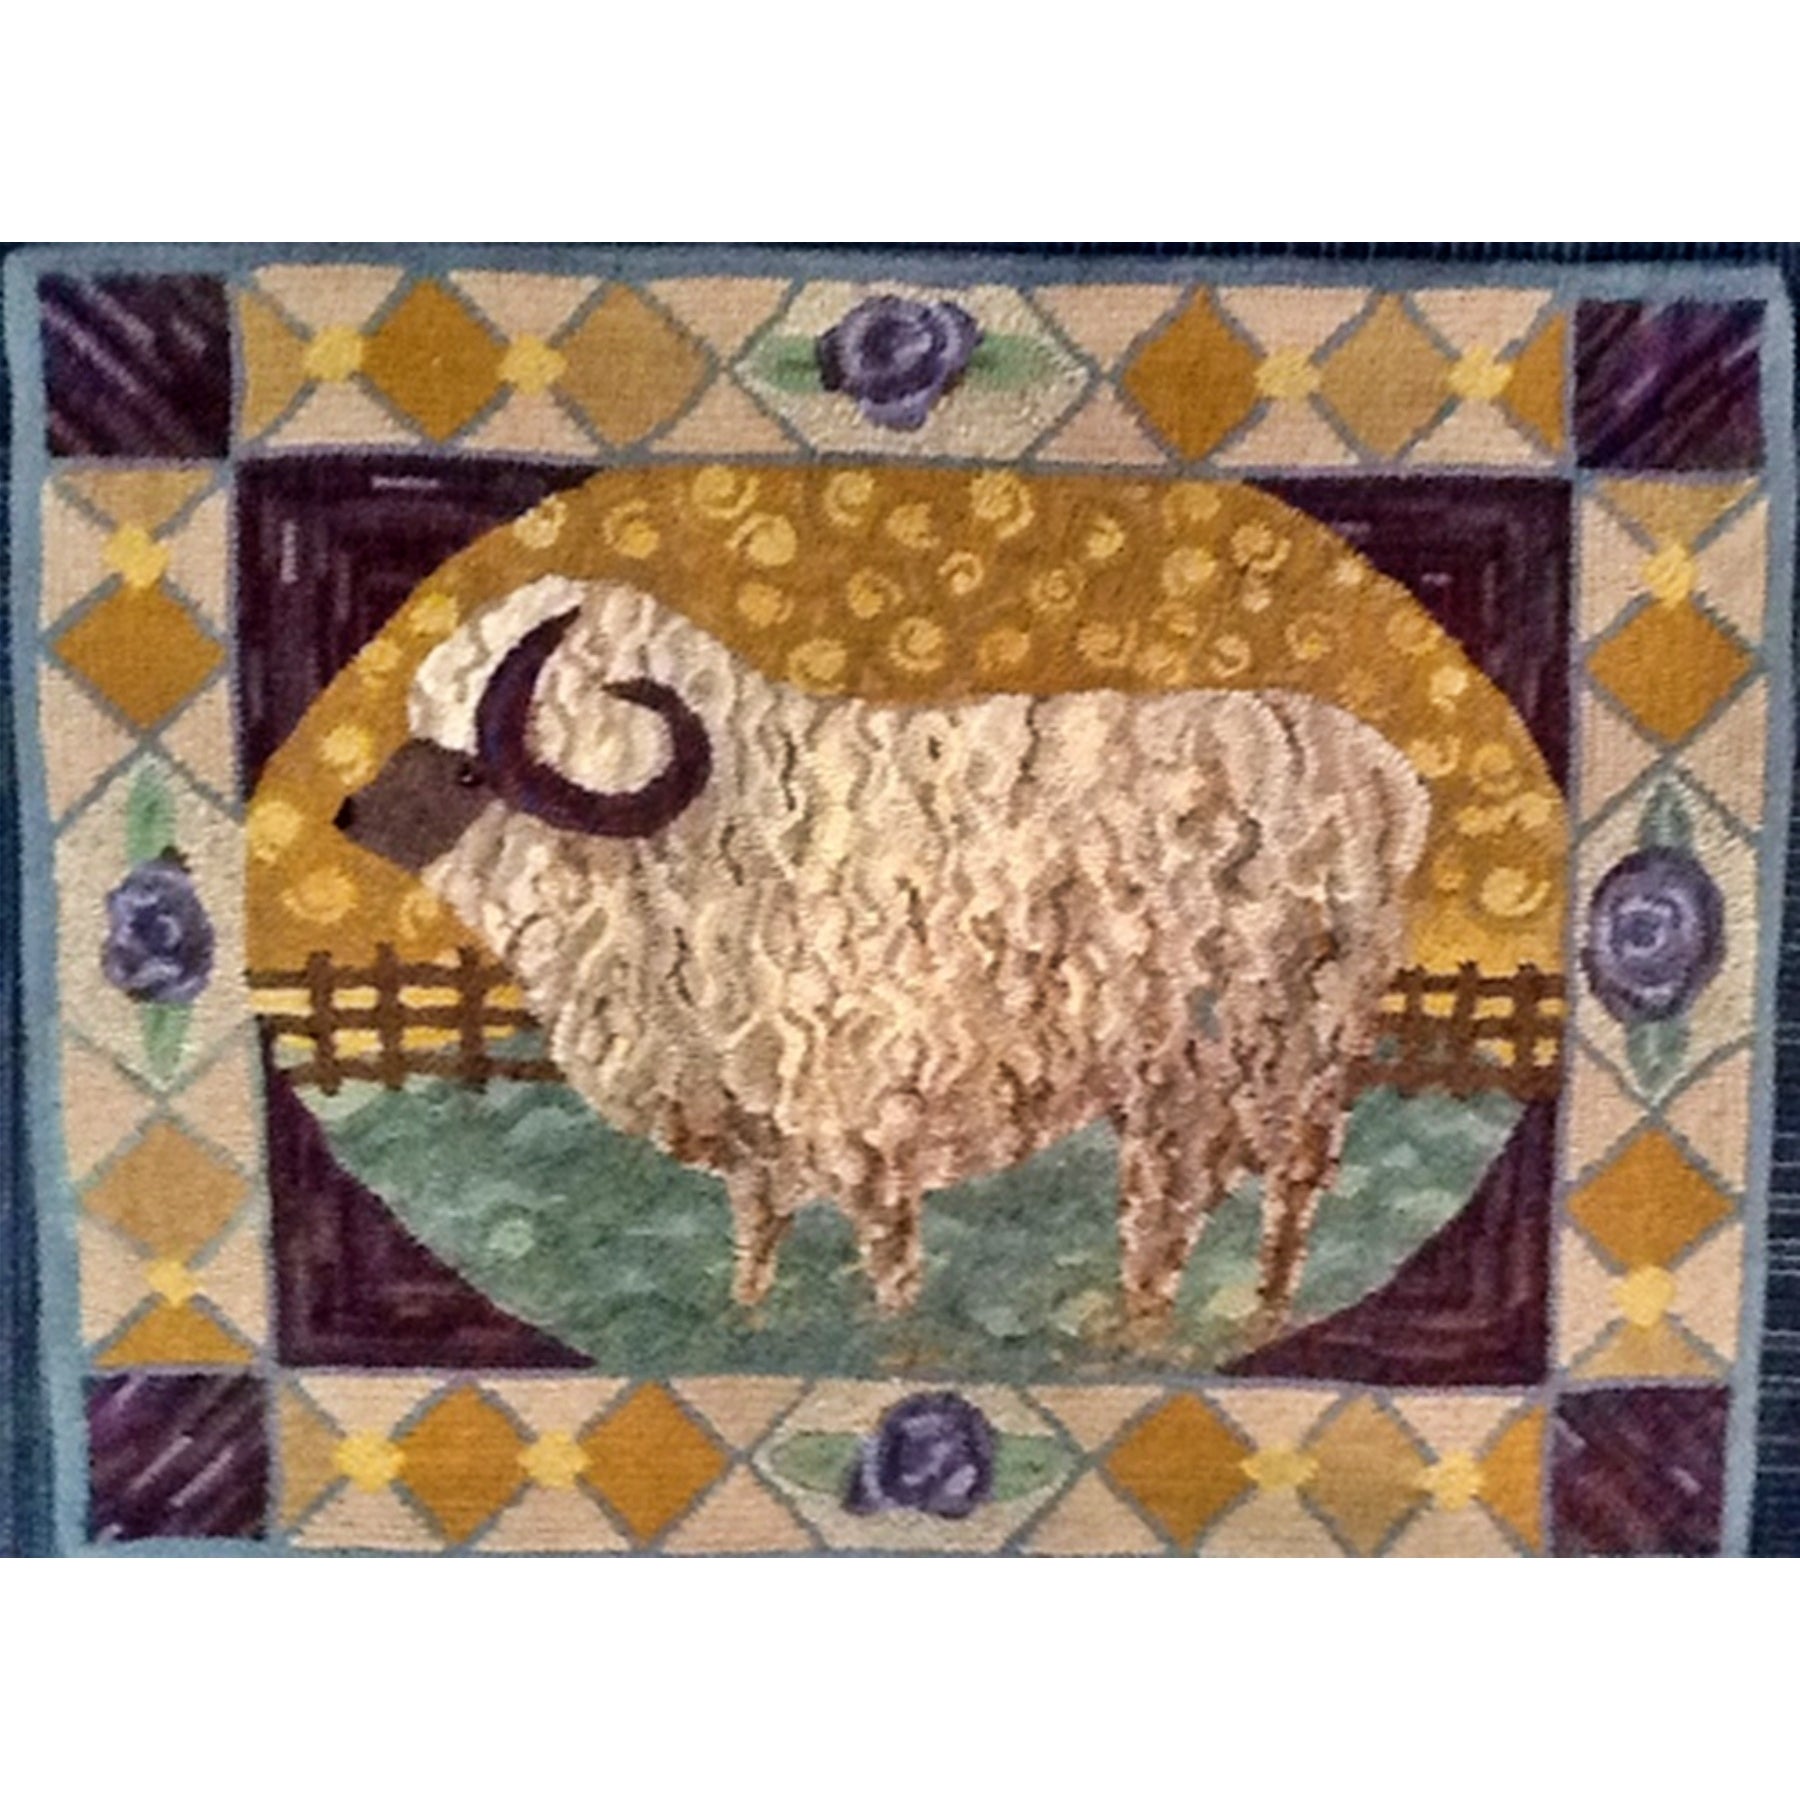 Compton Ram, rug hooked by Darcy Baskin